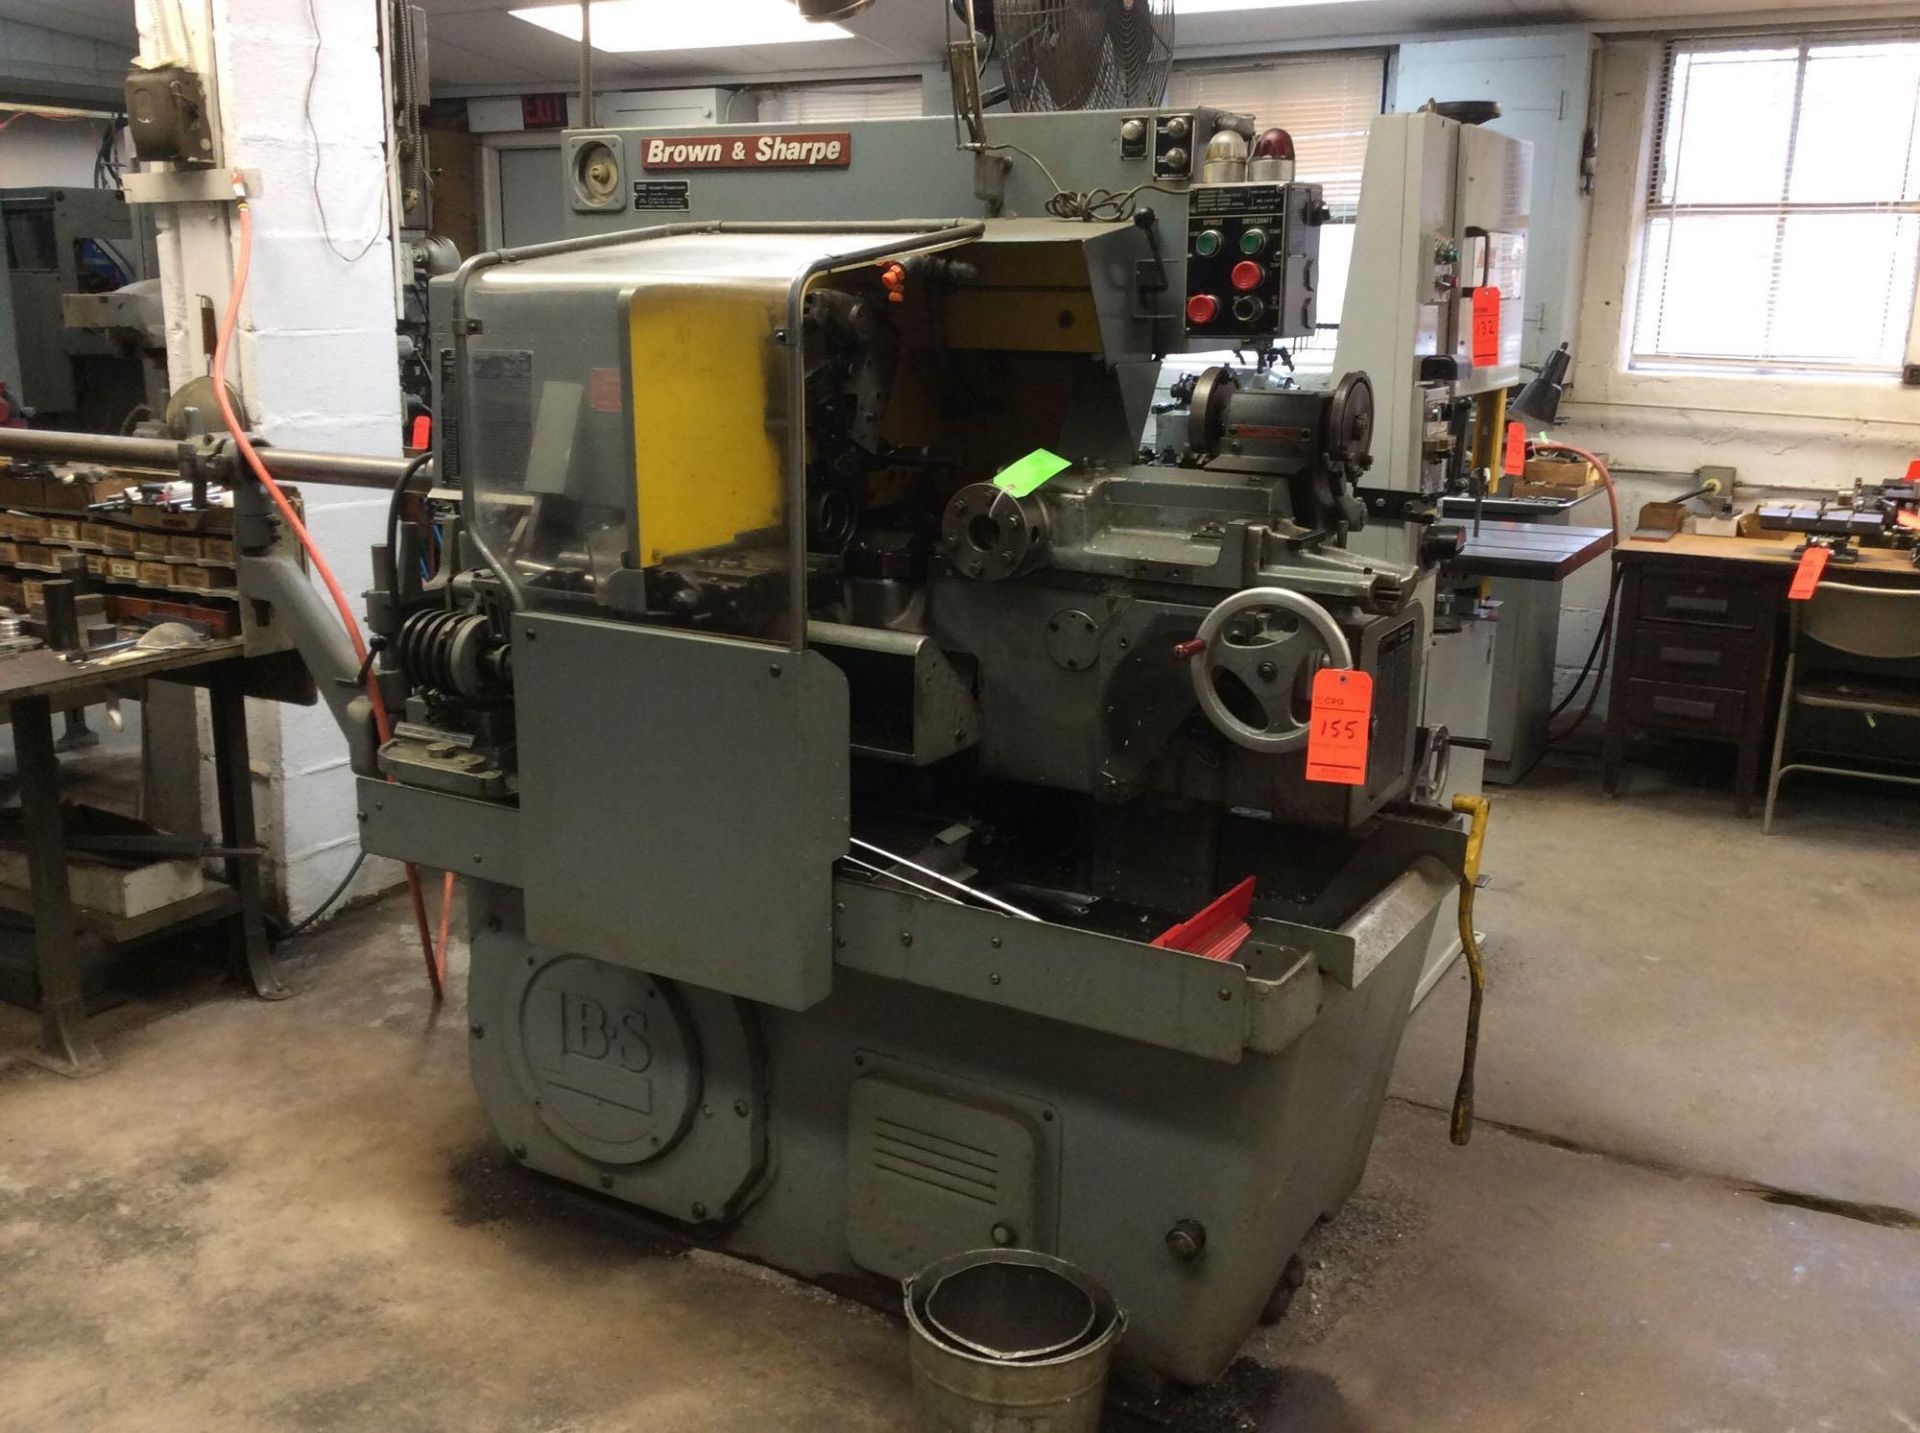 Brown and Sharpe square base automatic screw machine, mn 2, sn 542-2-6954, 1 5/8" capacity, 4 speeds